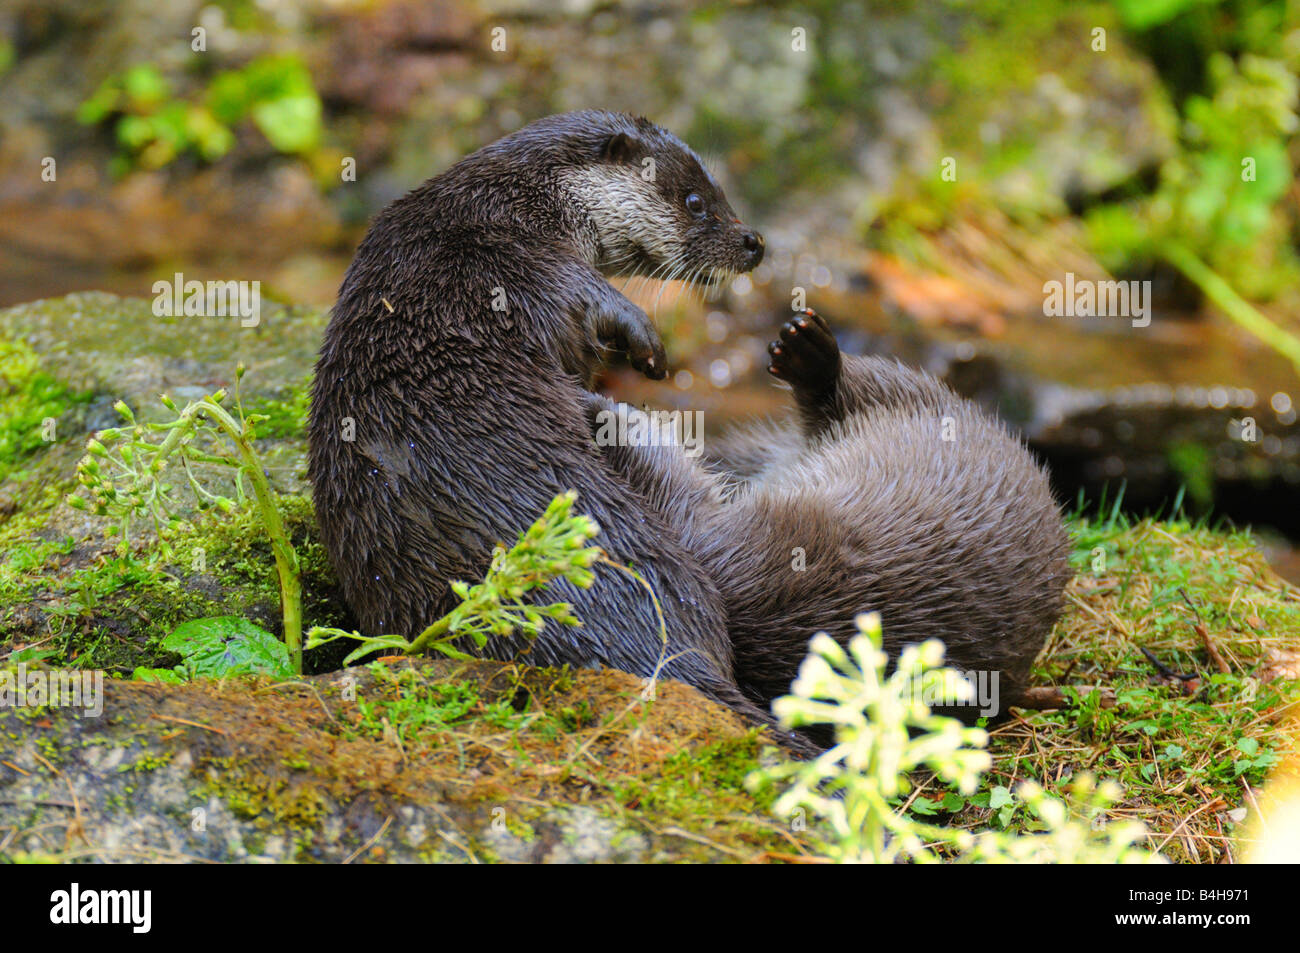 Close-up of two River Otters (Lutra lutra) fighting on rock, Germany Stock Photo